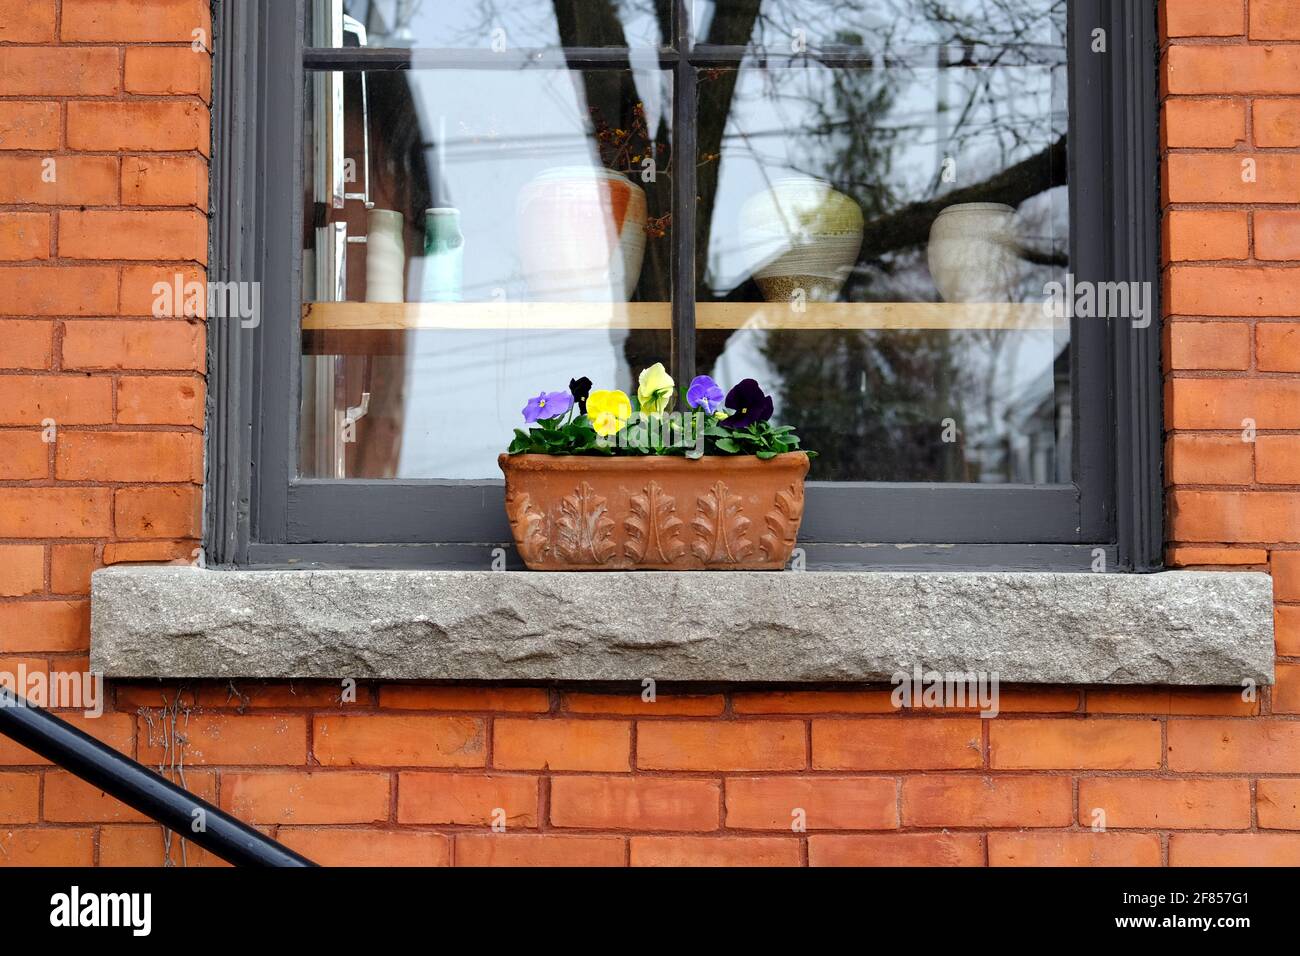 Small rectangular plant pot of multi-coloured pansies on the stone window ledge of a red brick house in spring time in Ottawa, Ontario, Canada. Stock Photo